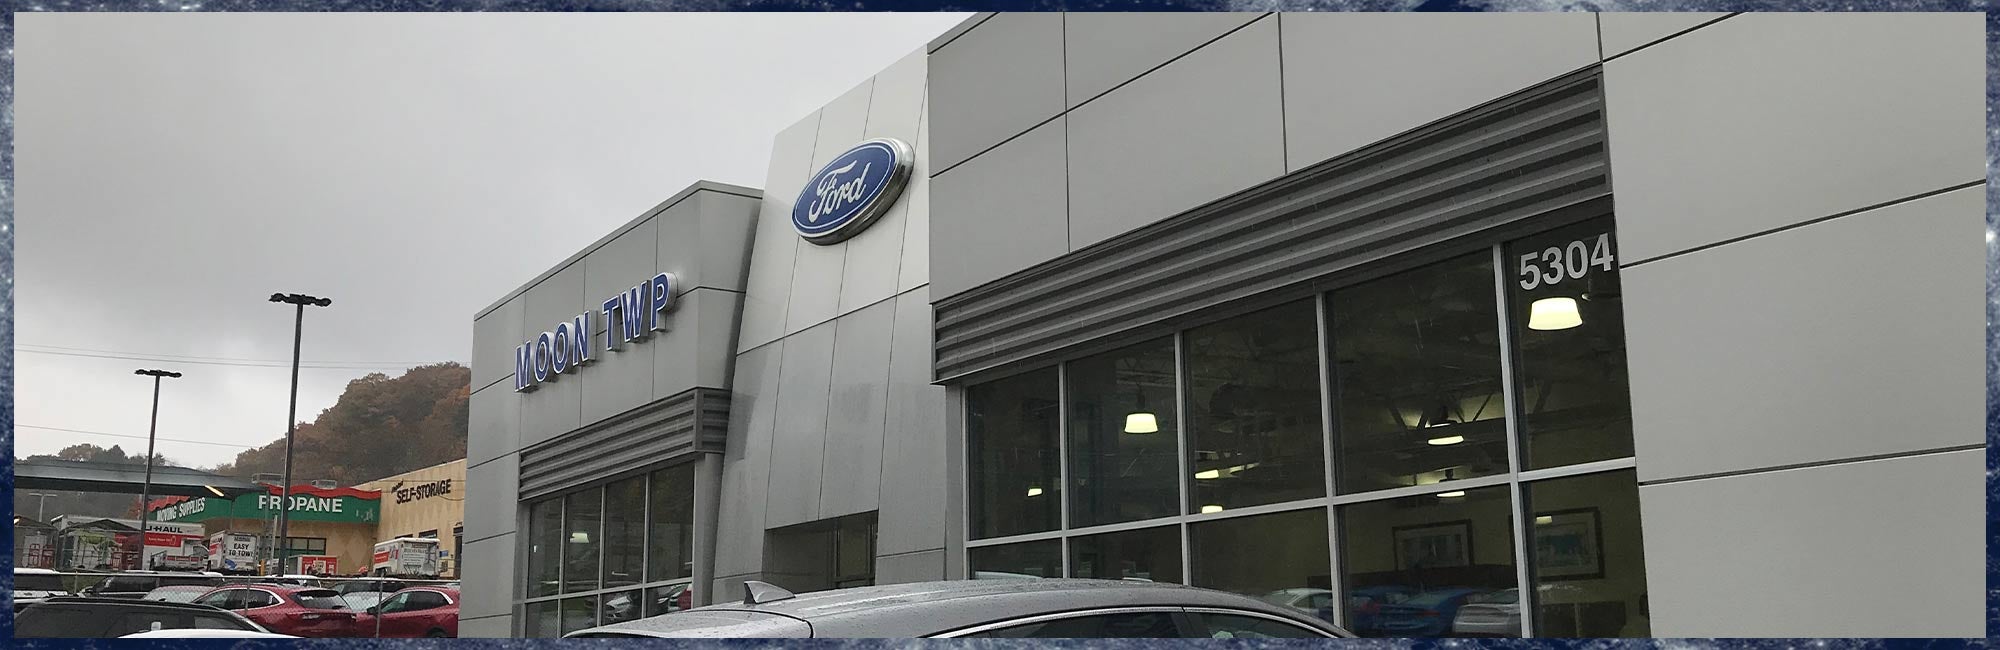 Ford dealership Your Ford Dealer Moon Township PA